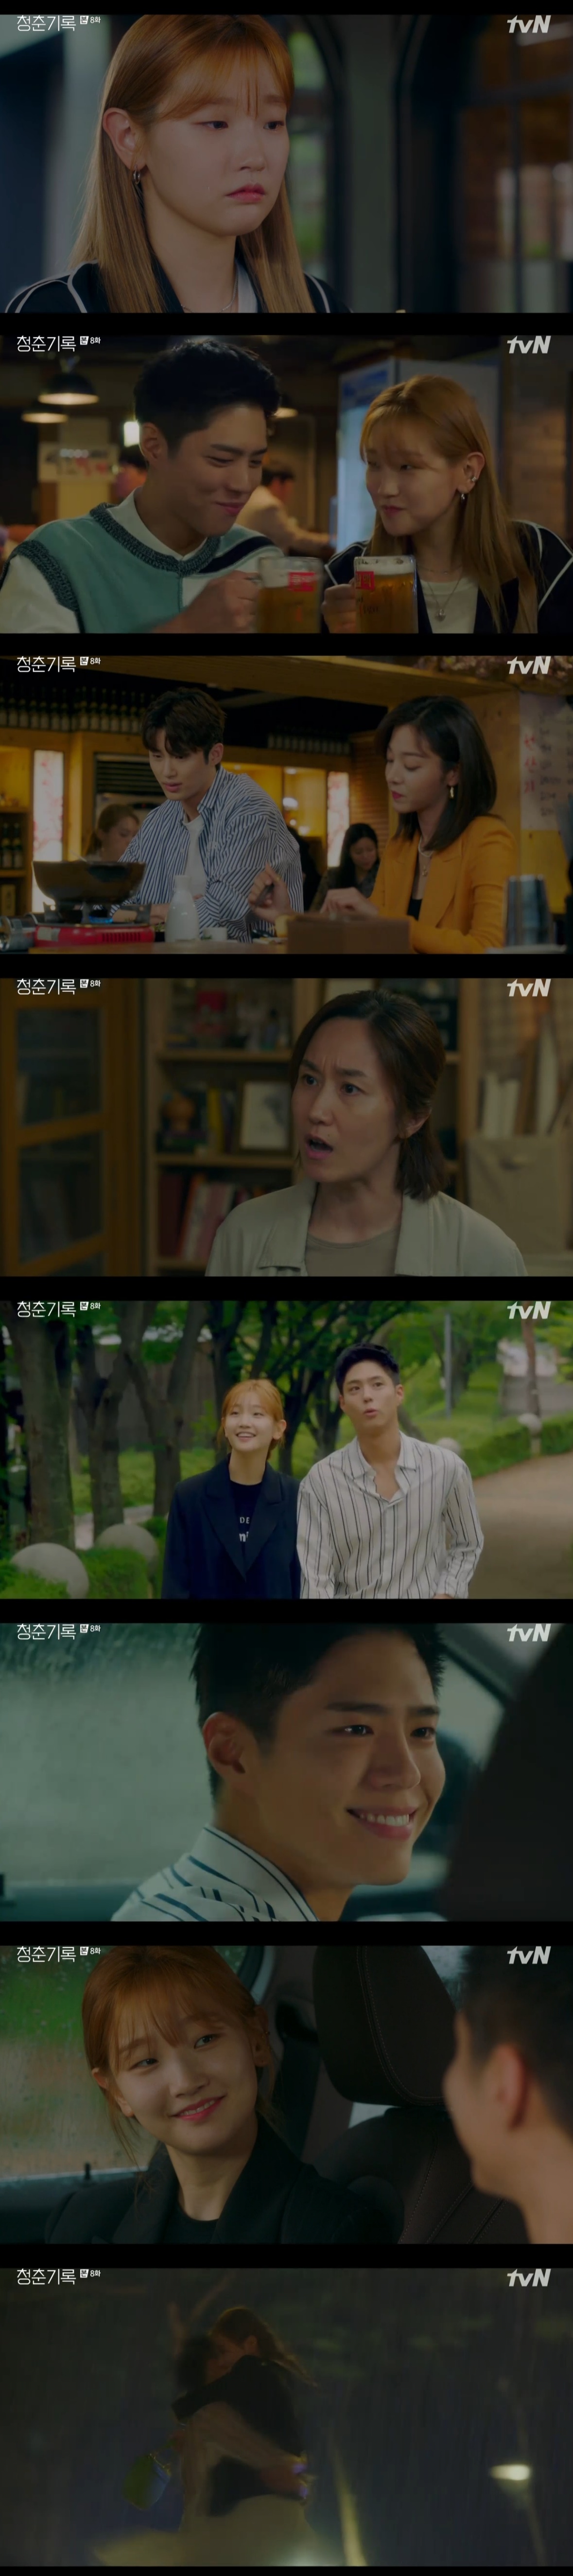 The Record of Youth Park Bo-gum has won the job and affection.In TVN Drama Record of Youth broadcast on the 29th, Park Bo-gums affection with his lover, Park So-dam, along with DeMaras popular Explosion, deepened and won the championship.On this day, Hye-joon was the first to announce the passing of the casting, and the two went for a walk while listening to music and the two went to a fast food restaurant.Hye-joon handed over milk instead of coffee ordered by Jeong-ha, and he drank smoothies he wanted to eat. He expressed his affection with the same age chemistry, saying choding taste to Hye-joon.In particular, when I saw Hye Hyos hand, he said, I will be half my face.Hye-joon said, Did you want to see me like that? And then laughed at him.In Hye-joons response, Its good to attract you. I wanted to have a childish love. I hope love is not realistic.I have been realistic since I was a child, he said. I am glad to be in love with a good person. Hye-joon, who also played the role of the cast The Resident first year, said, You have to dye your hair in black.My girlfriend is a makeup artist, but I have to do that, Hye-joon said. I feel comfortable. I feel stable.I will give a name value. Hye-joon said, Do you have to forgive anything to pay for your name as Sa Hye-joon? He replied, You have to forgive everything I do.Hye-joon replied, Call, and laughed.On the other hand, I met Hye Juns hair in his house, not a shop, to dye his hair. He could not write the shop personally.He dyed Hye-joons hair, which he decided to do later.Ae Sook (Ha Hee-ra) heard Hye-joons casting of Drama from Lee Young (Shin Ae-ra). Lee Young-eun said, If you leave me alone, the children will live on their own.I have too much to do. Especially because my husband Yeongnam said that he would like Hyejuns Drama to fall down and wake up.However, Hyejun did his best to play the role of The Resident while watching emergency medical books in the library.After Mom Ae Sook was sad that she did not tell her about the drama casting, she replied that she tried to tell her when she was on air.Over a week, Hye-joons appearance on the show caused a huge wave. My grandfather Min-ki (Han Jin-hee), who saw Drama, poured tears, saying, Its done, its done.In particular, the character of Hye-joon, a younger son, caught the audiences emotions and took a good eye stamp and became a popular explosion.Min Jae and Hye Jun, who do not know the tricks of Taesu, discussed their next work.Min Jae insisted that he should make money by melodrama, and Hyejun Choices the historical drama and said, It is good to show the cruelty and cruelty of power.The king who needs Choices his children, not love, is good. It is good to have power among the family and to point knives at each other with interests.I want to fill my fill with what I want. After that, Hyejoon bought a car, first tested the manager Minjae, and then drove the car for the second time.When it rained again during the date, Hyejun asked, Do you pursue a stable life? And I do not even know if there is a stable life.I do not think it is necessary to define and make it because it does not exist. At the end of the broadcast, Hyejun and Jungha were drawn to dance in the rain, raising questions about the future development.